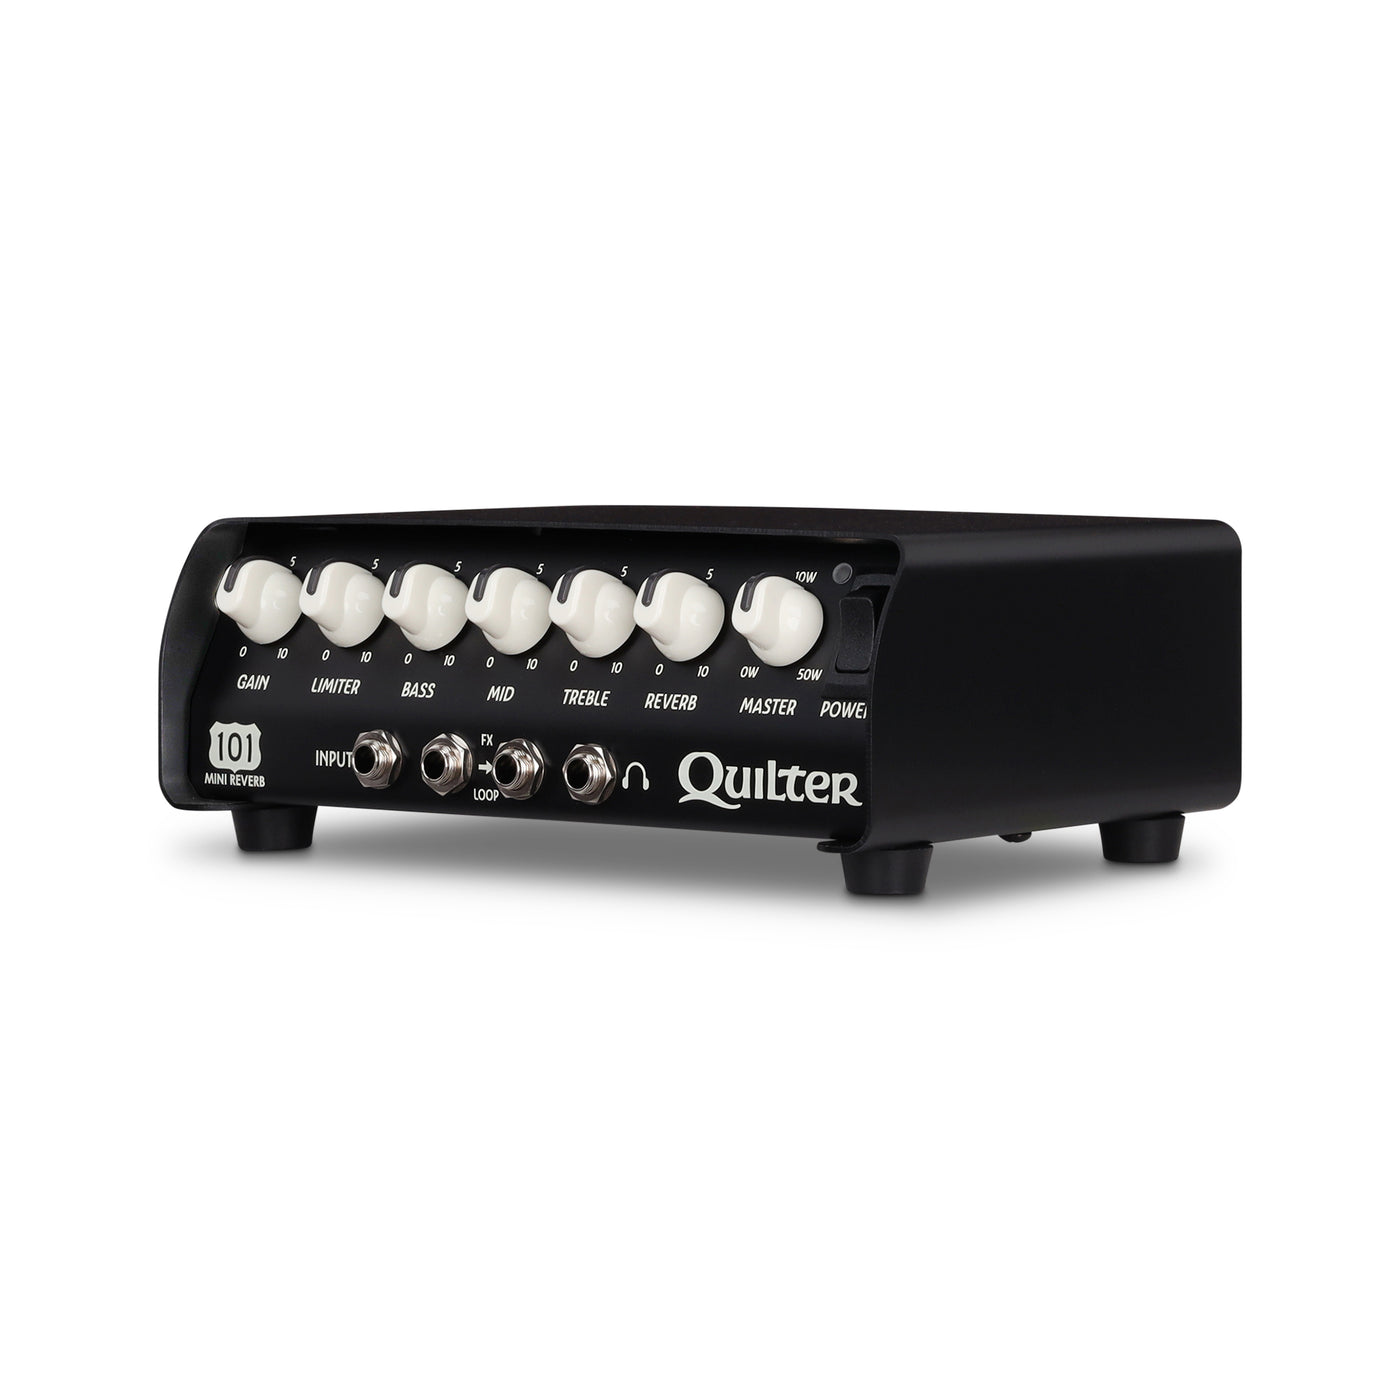 Quilter Labs 101 Mini Reverb Guitar Amplifier head facing to the left